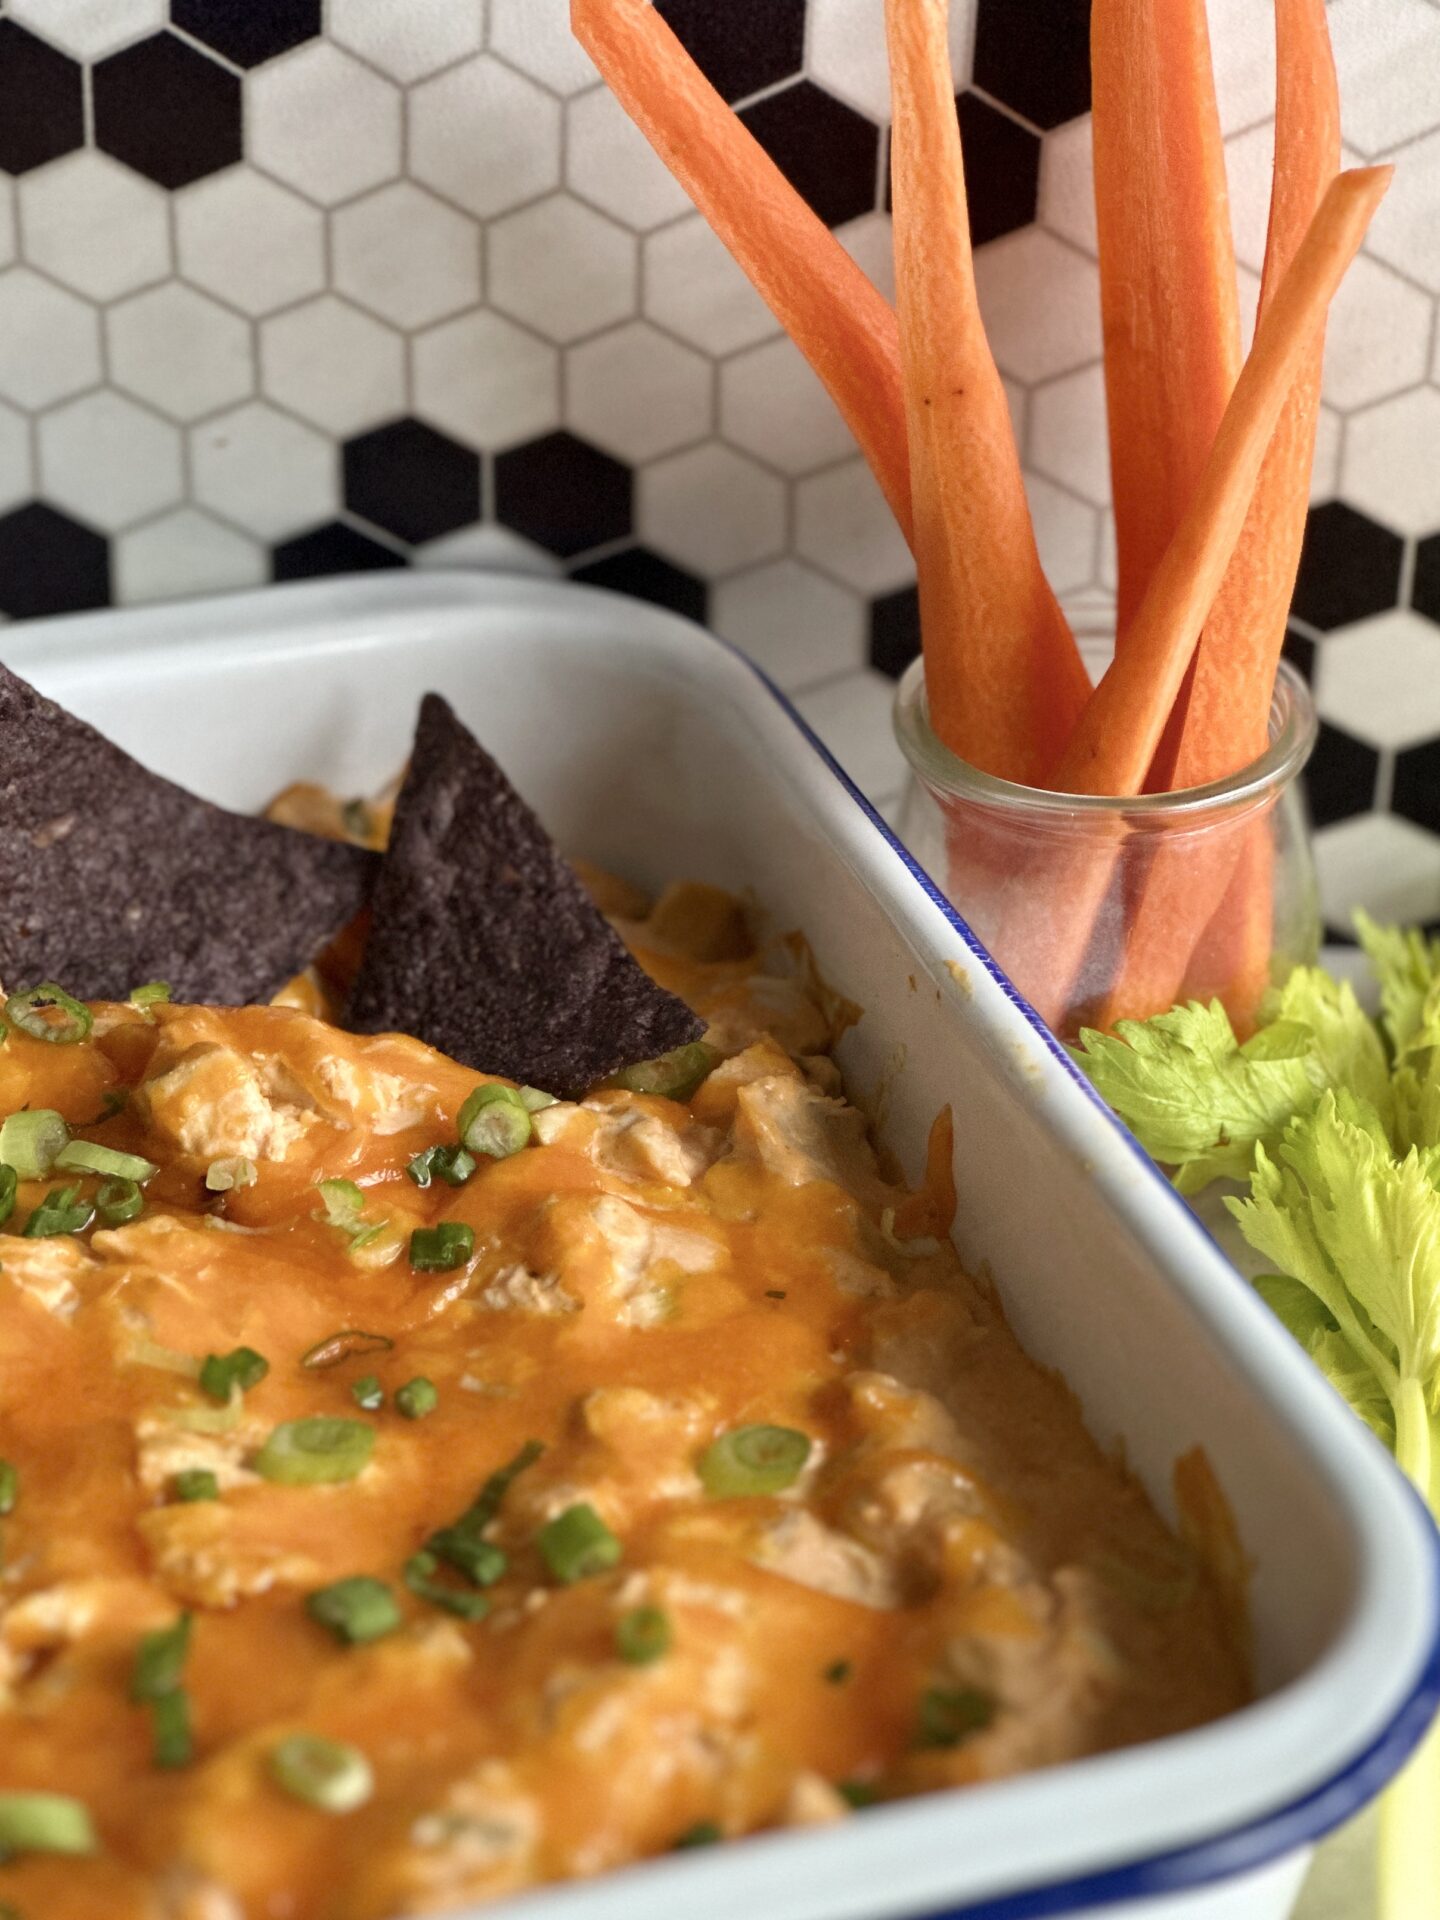 White enamel pan of Hot and Spicy Buffalo Chicken Dip with a topping of melted cheddar and green onions.  Seen on a counter top with vegetables and blue corn chips for dipping.